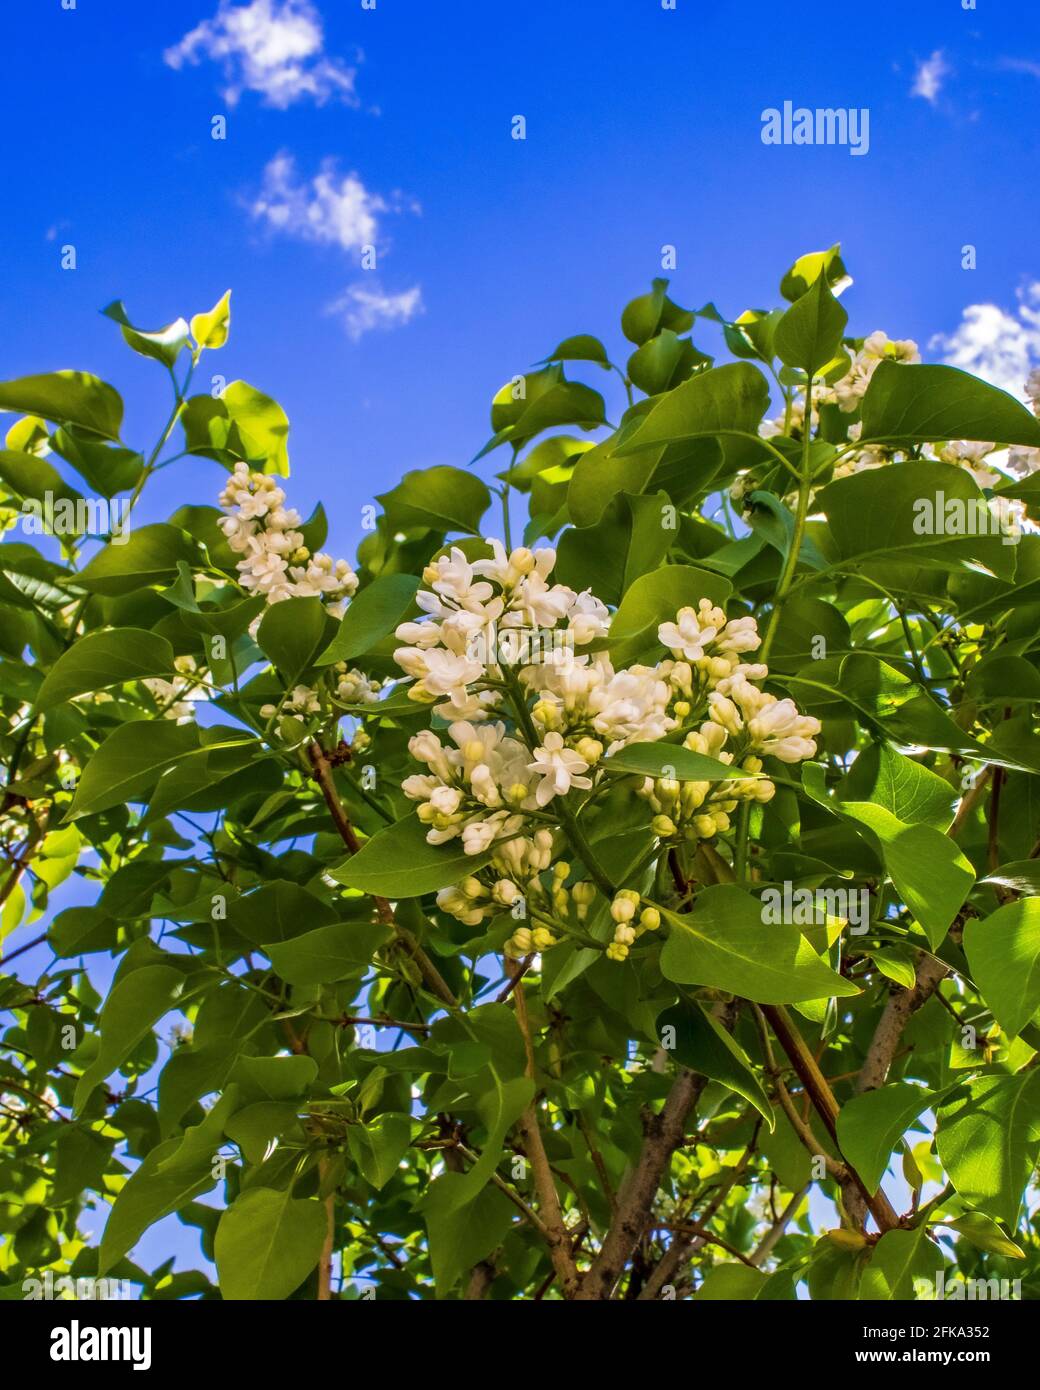 A white lilac bush blooming in the spring sun Stock Photo